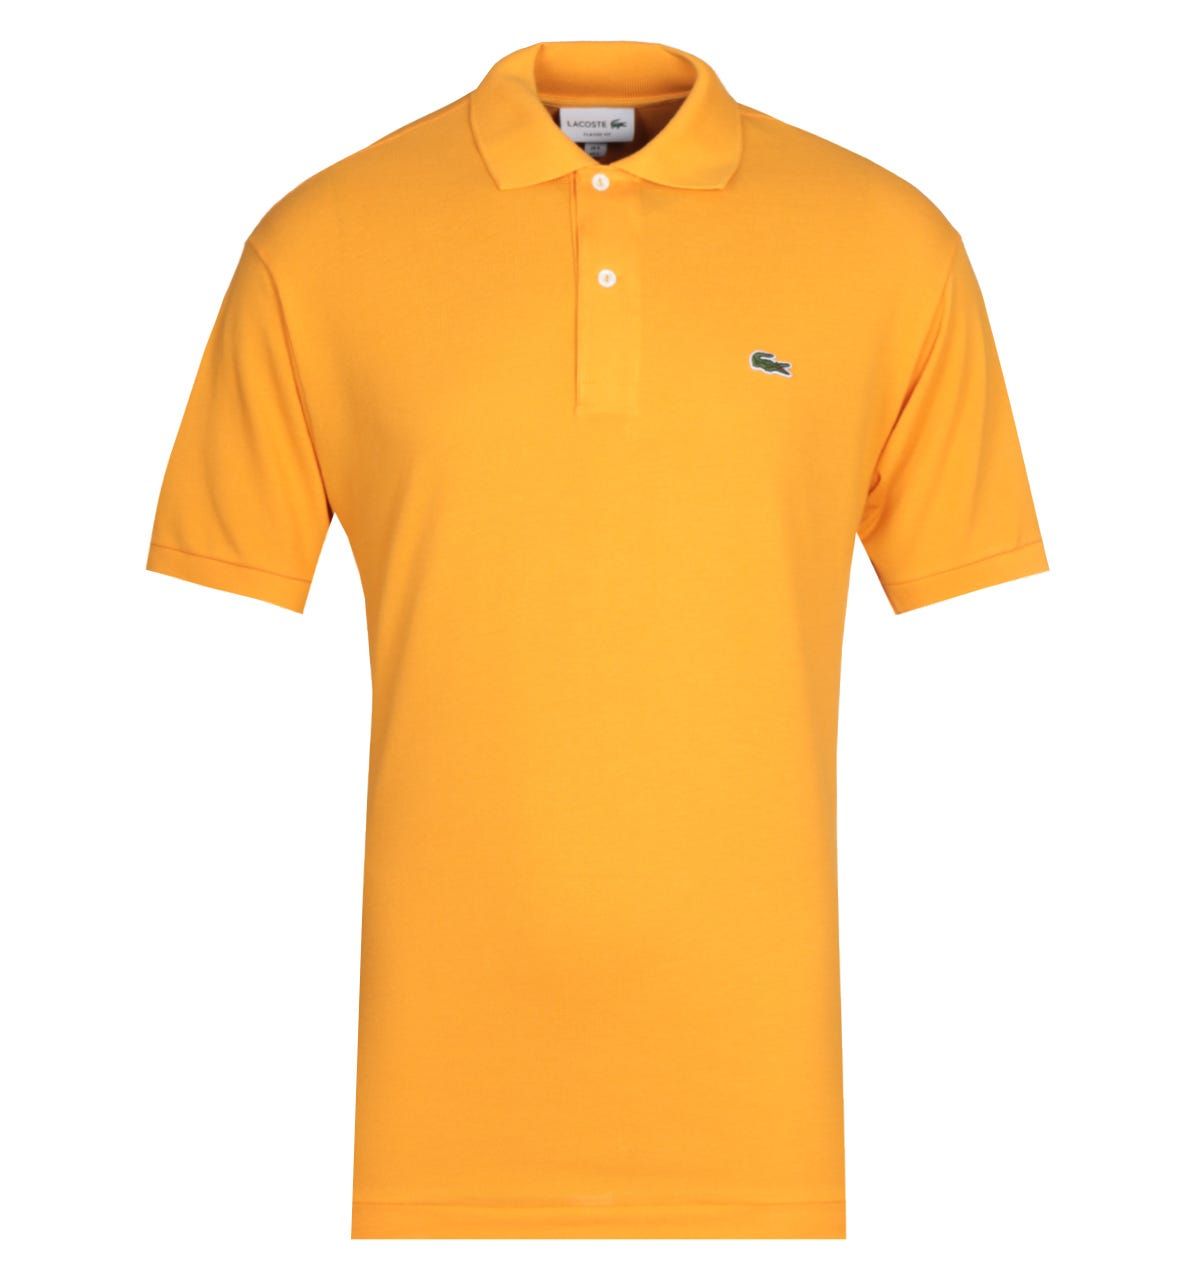 <p>A pure cotton composition crafted by Lacoste. The Lacoste Orange MC Homme Polo Shirt is fitted with a two-button placket, spread collar and ribbed trims. The design is finished with the Lacoste logo embroidered on the chest.</p><ul><li>Cotton composition</li><li>Two button placket</li><li>Tonal stitching</li><li>Ribbed trims</li><li>Lacoste logo embroidered on chest</li></ul><p>Style & Fit:</p><ul><li>Regular fit</li><li>Fits true to size</li></ul><p>Fabric Composition & Care:</p><ul><li>100% Cotton</li><li>Machine washable</li></ul>